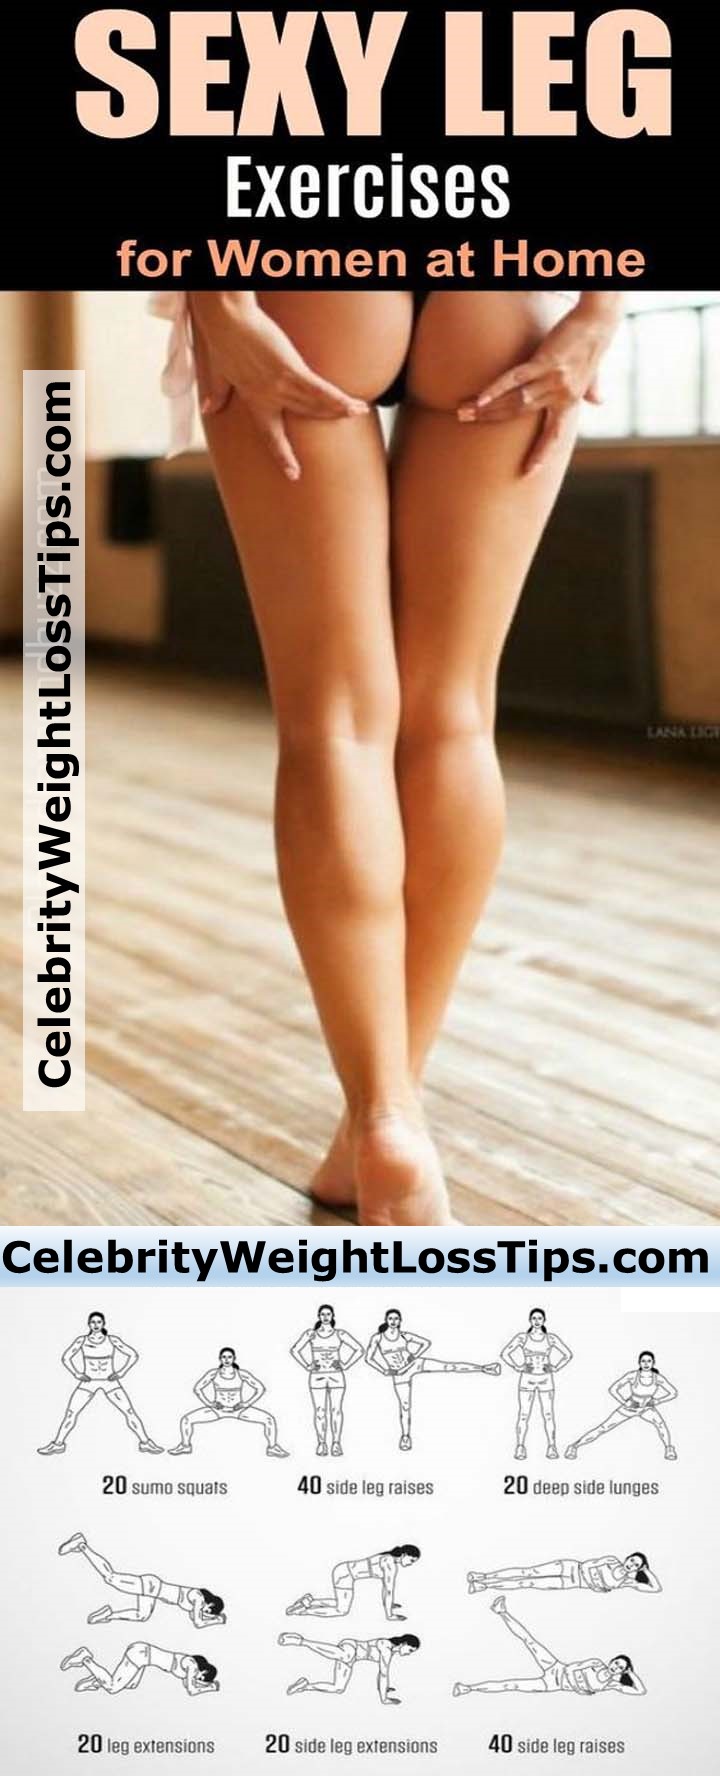 Sexy Legs Exercises You Can Do at Home - Check out these sexy leg exercises you can do at home to make your legs and butts sexier and more toned while you lose weight as well. #legs #exercises #fitness